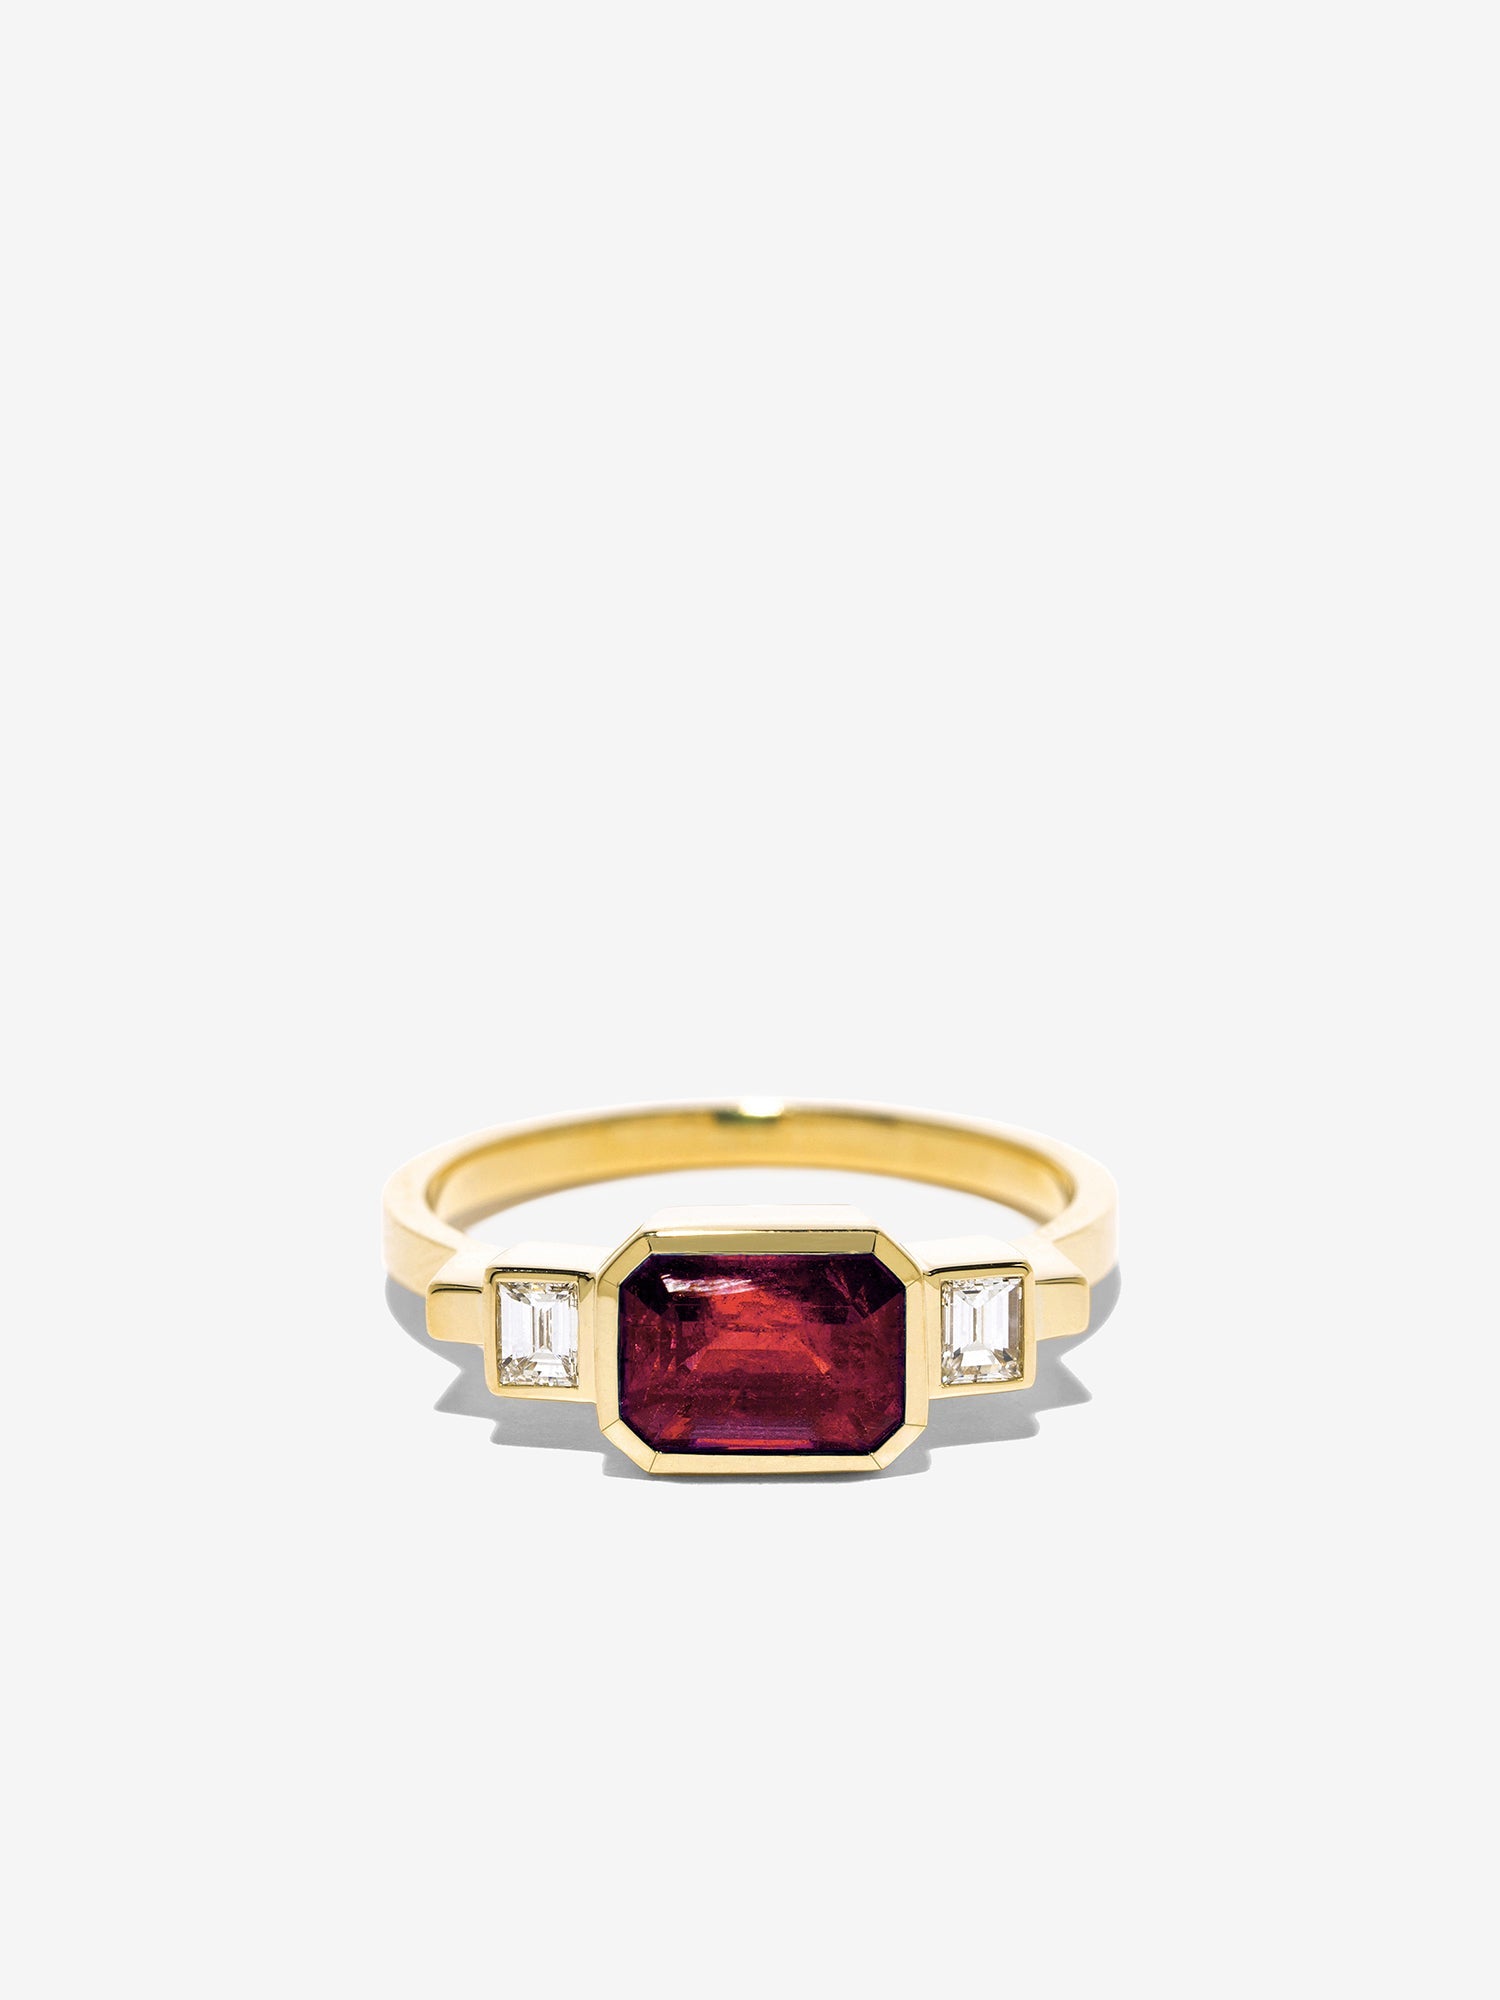 Ruby and Baguette Diamond Ring